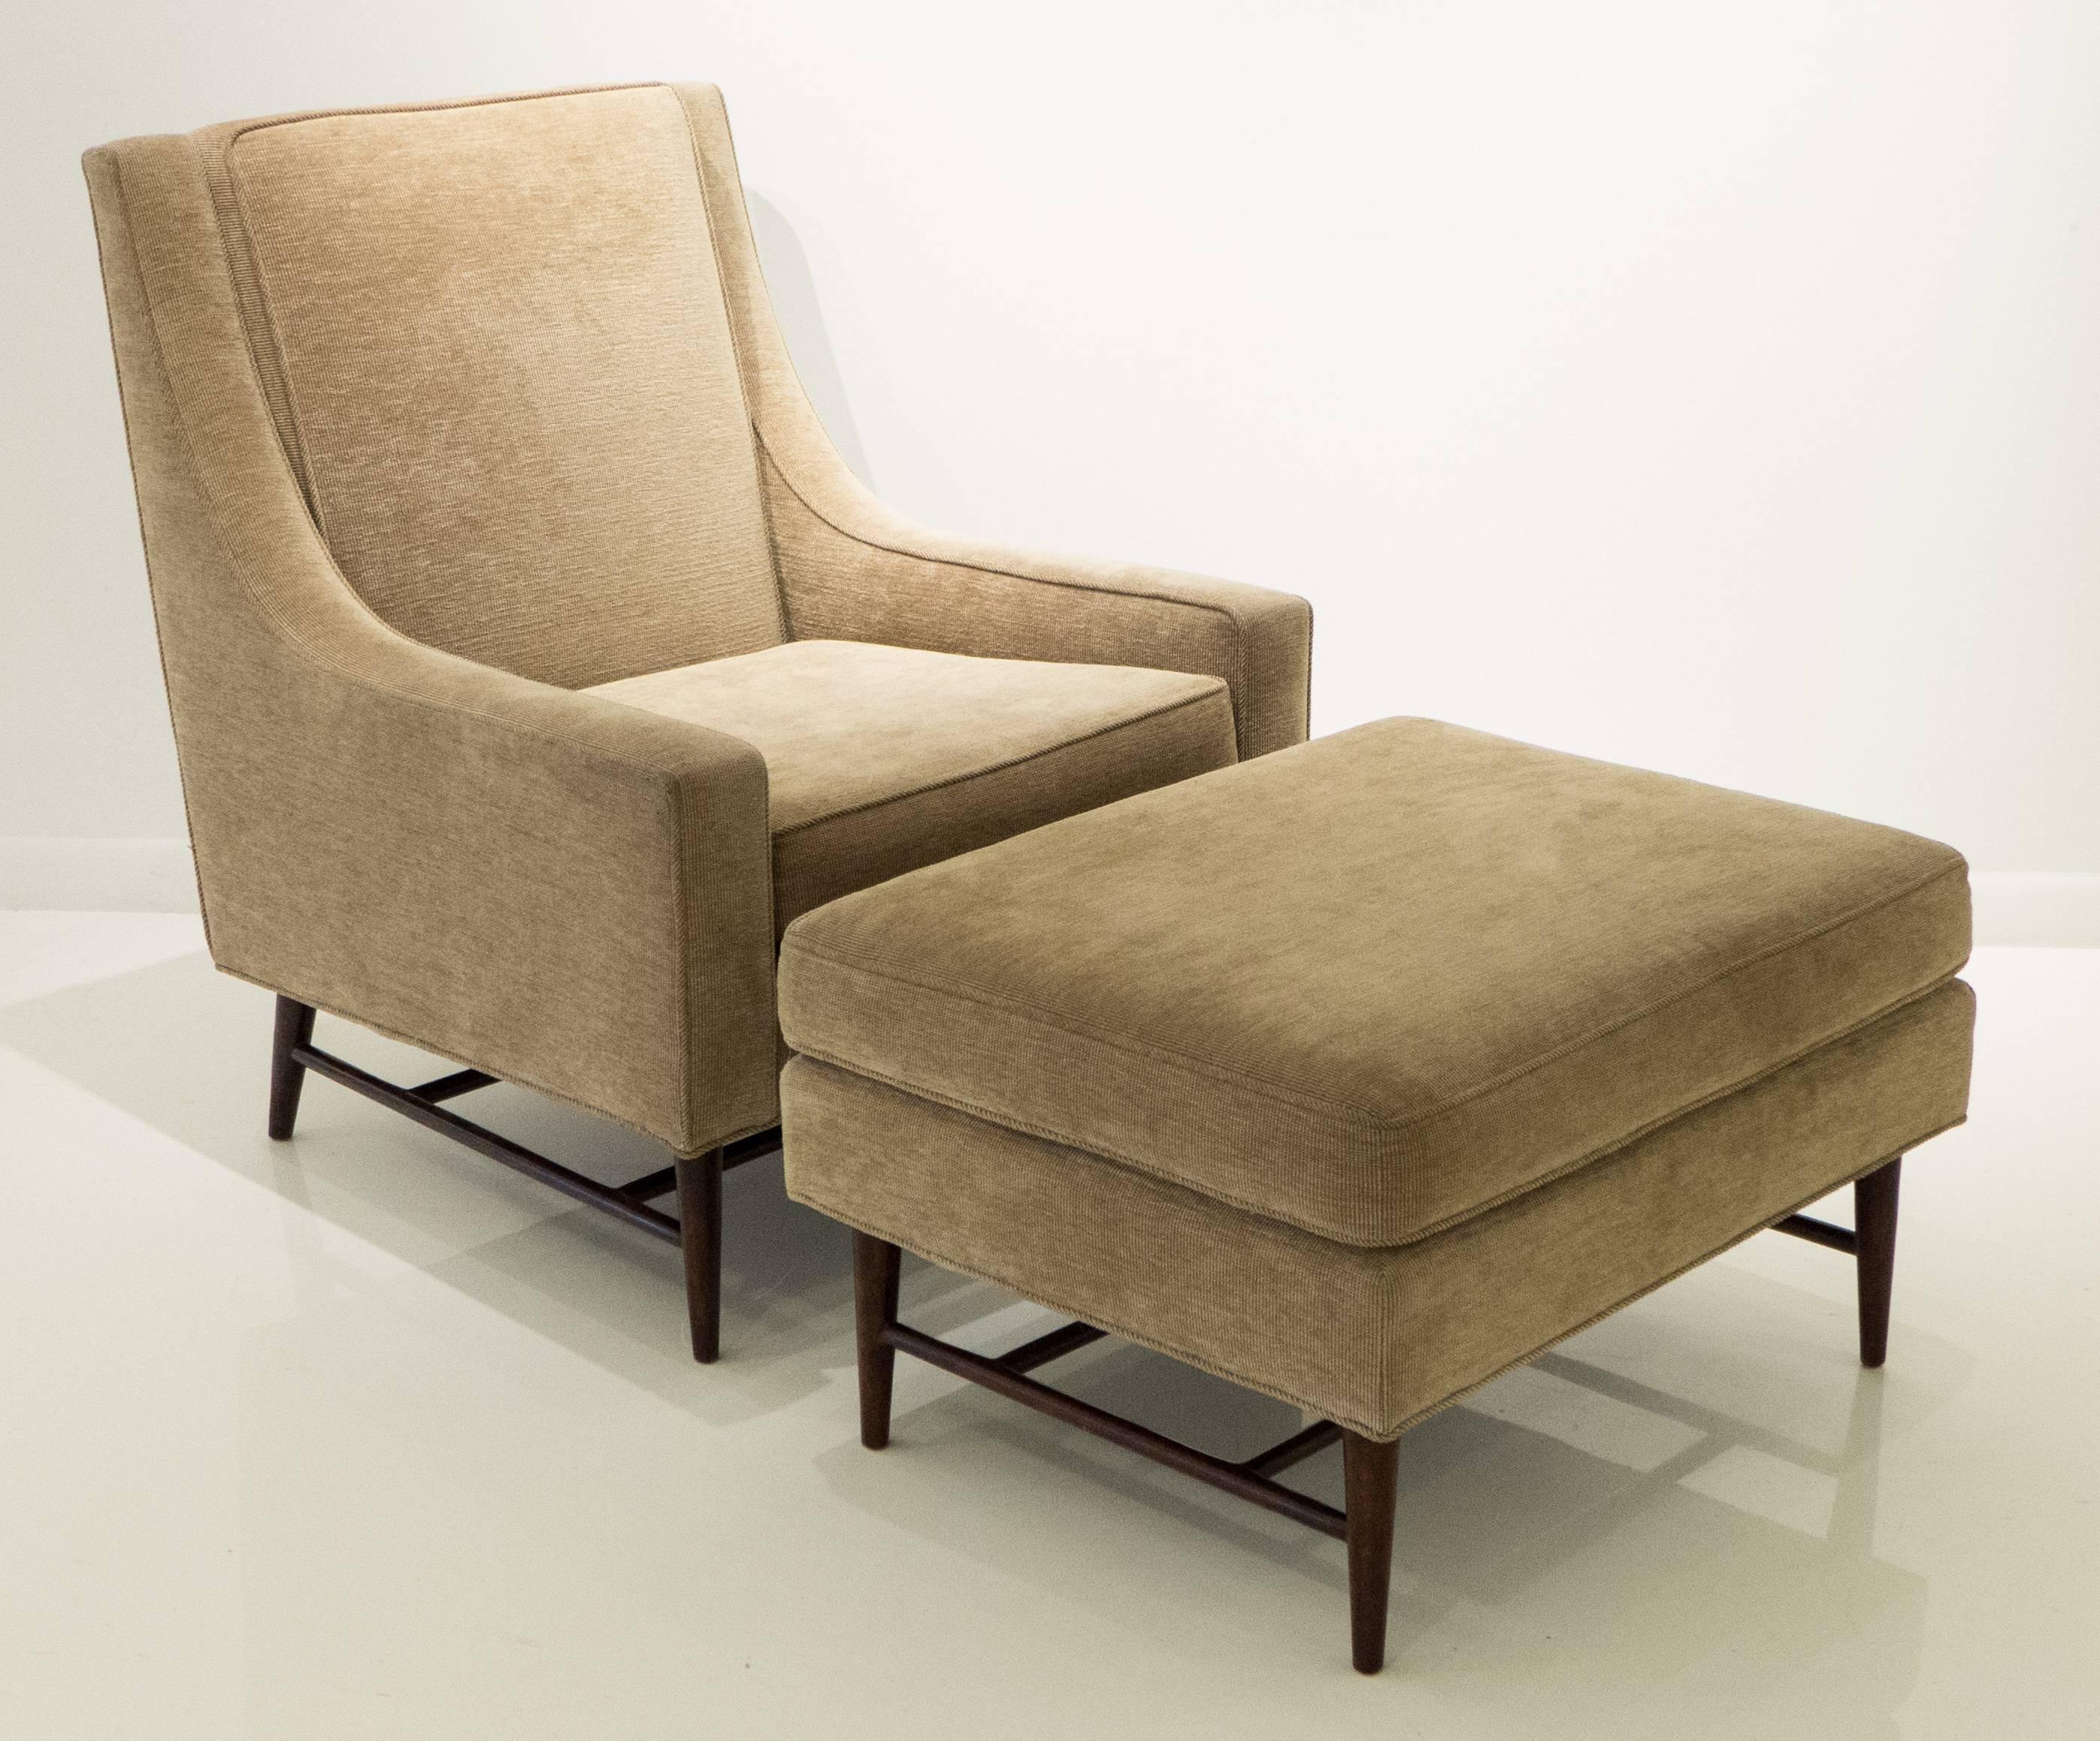 High-back lounge chair (model #468) with mahogany legs and cross-stretchers; along with the corresponding ottoman (model #468A). Designed and produced by Harvey Probber, c. 1950's. Reupholstered in the past eight years. A substantial and comfortable